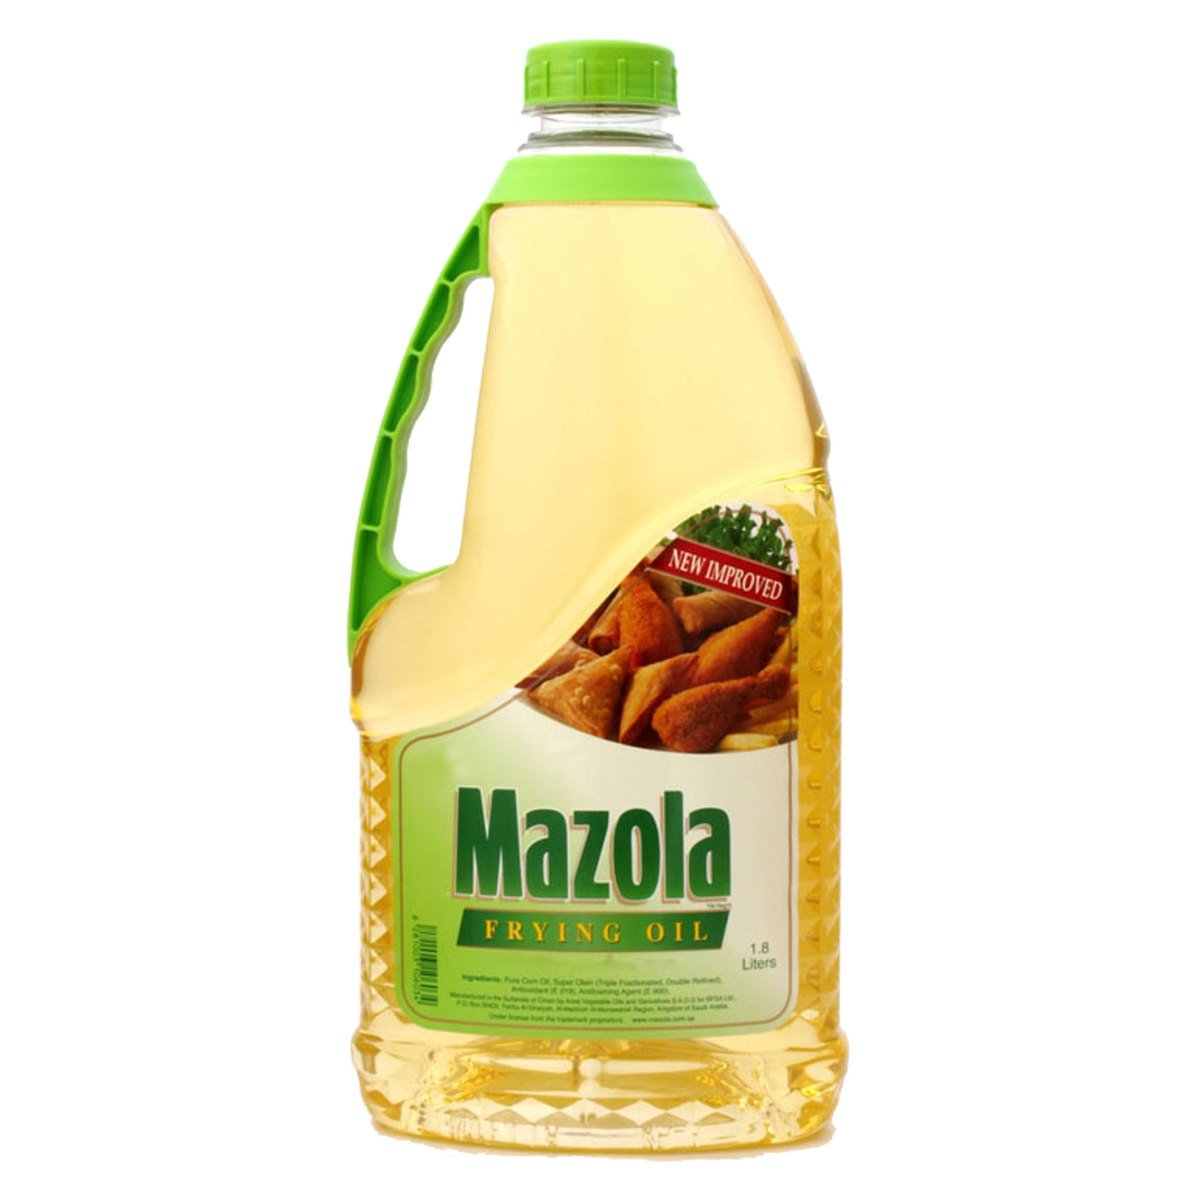 Mazola Frying Oil 1.8 Litres